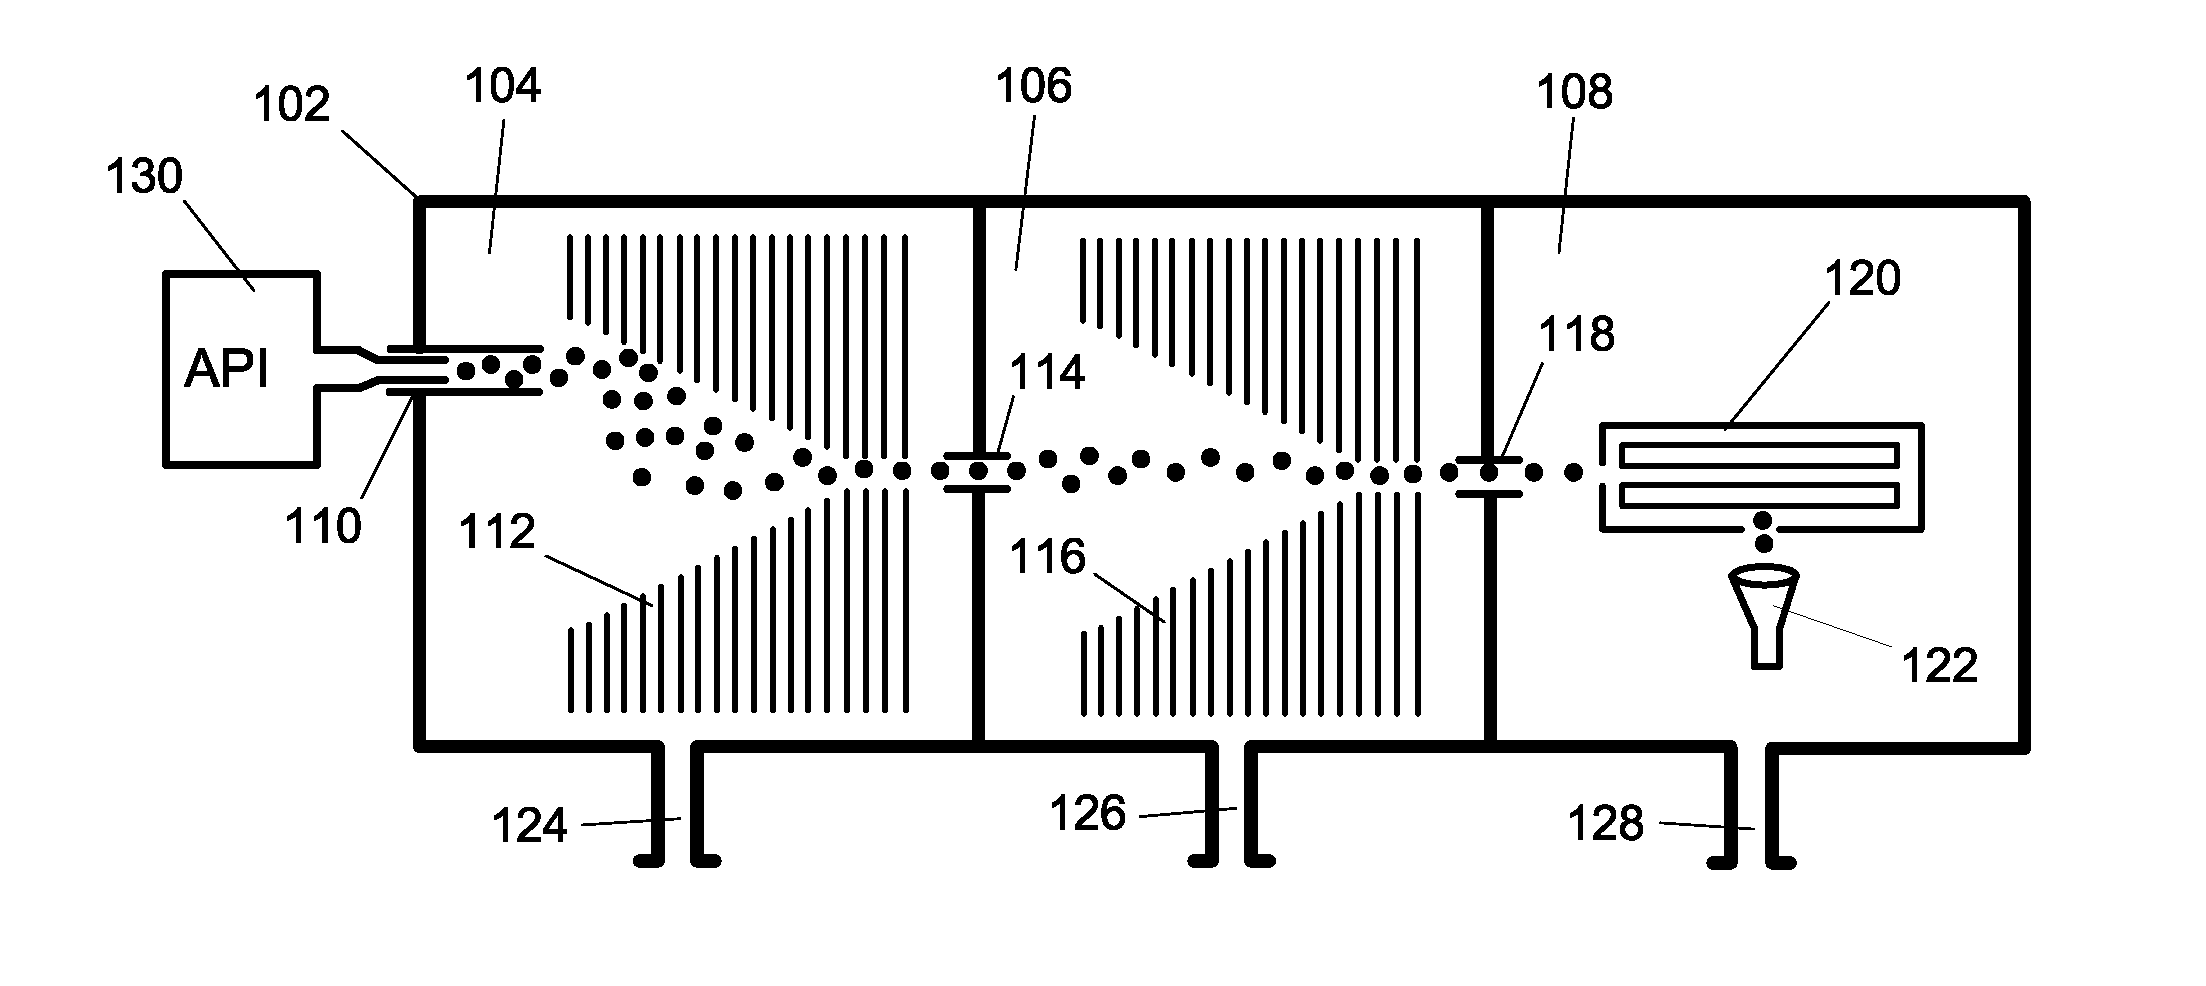 Sample Inlet and Vacuum System for Portable Mass Spectrometer